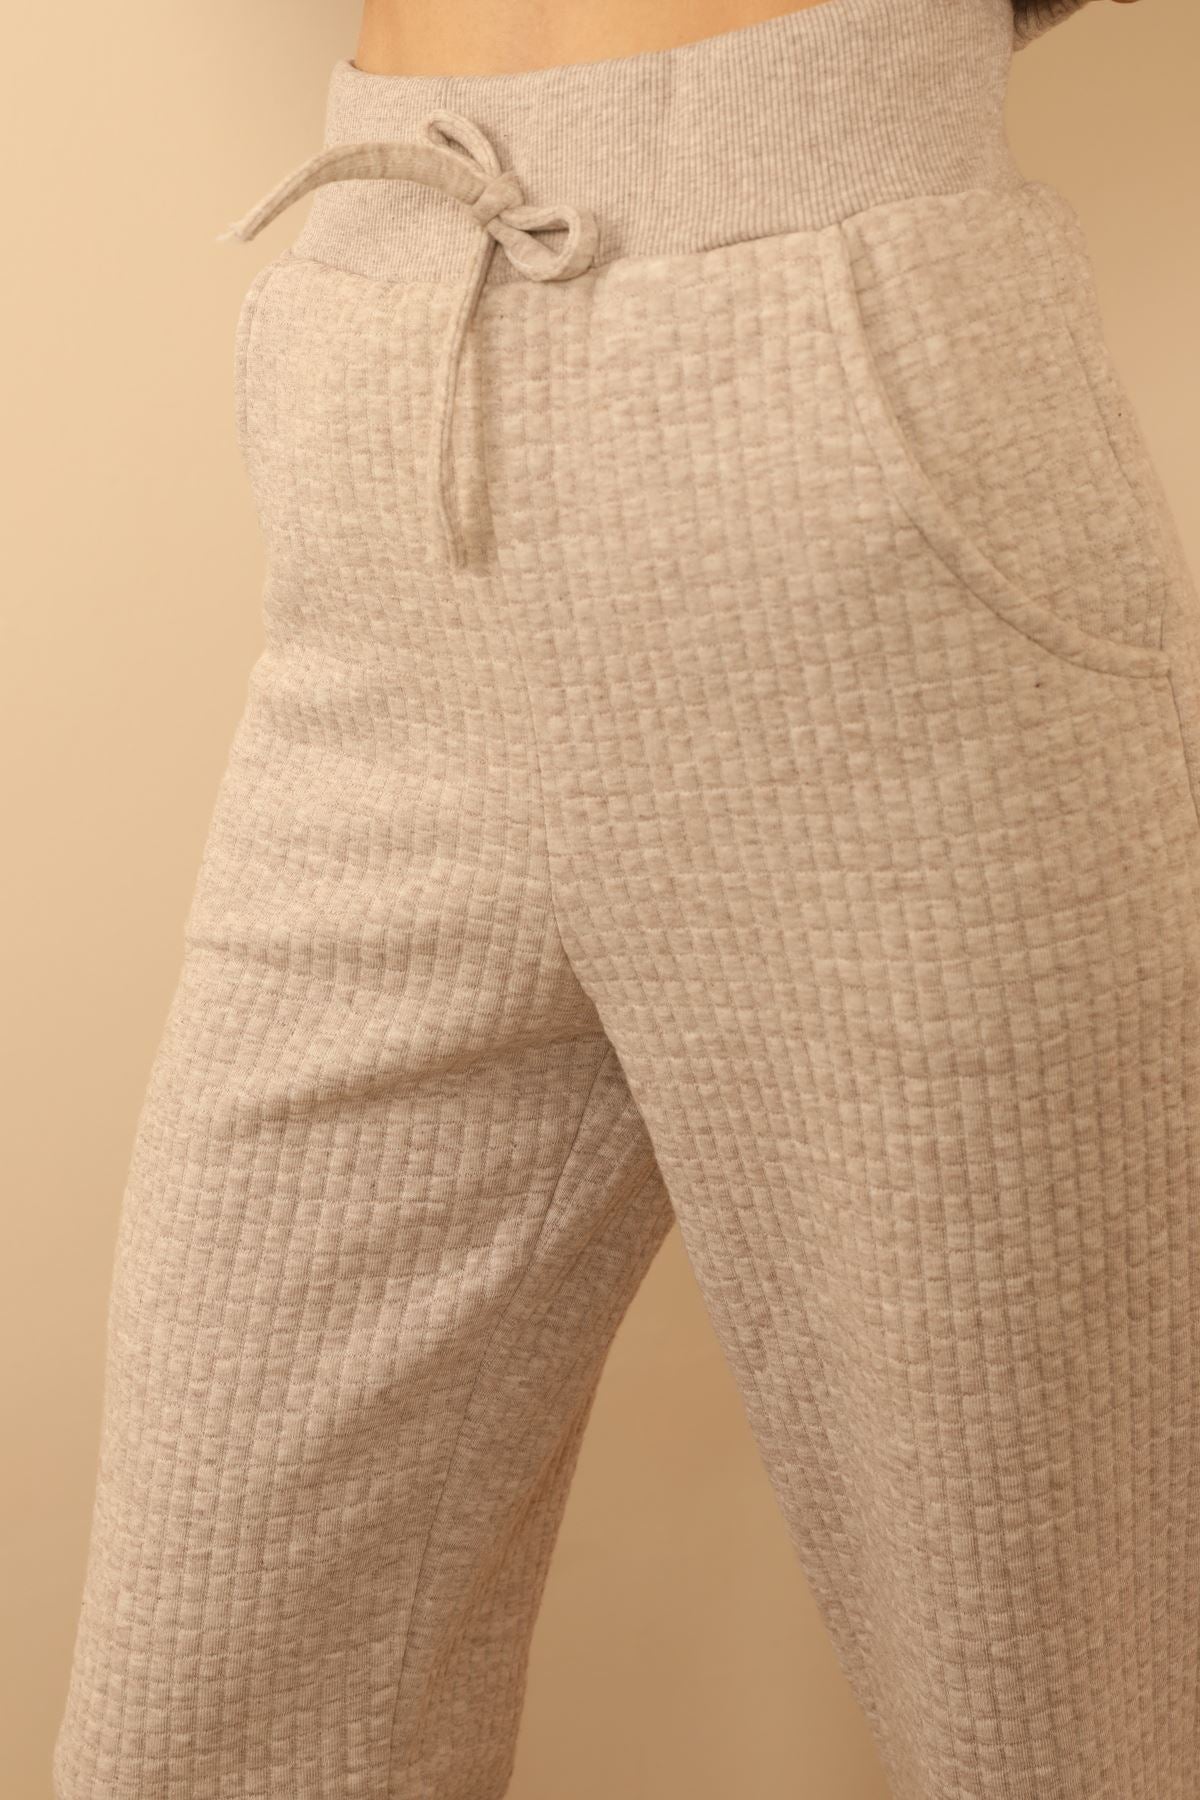 Honeycomb Fabric Ankle Length Comfy Fit Women'S Sweatpant - Beige - STREETMODE™